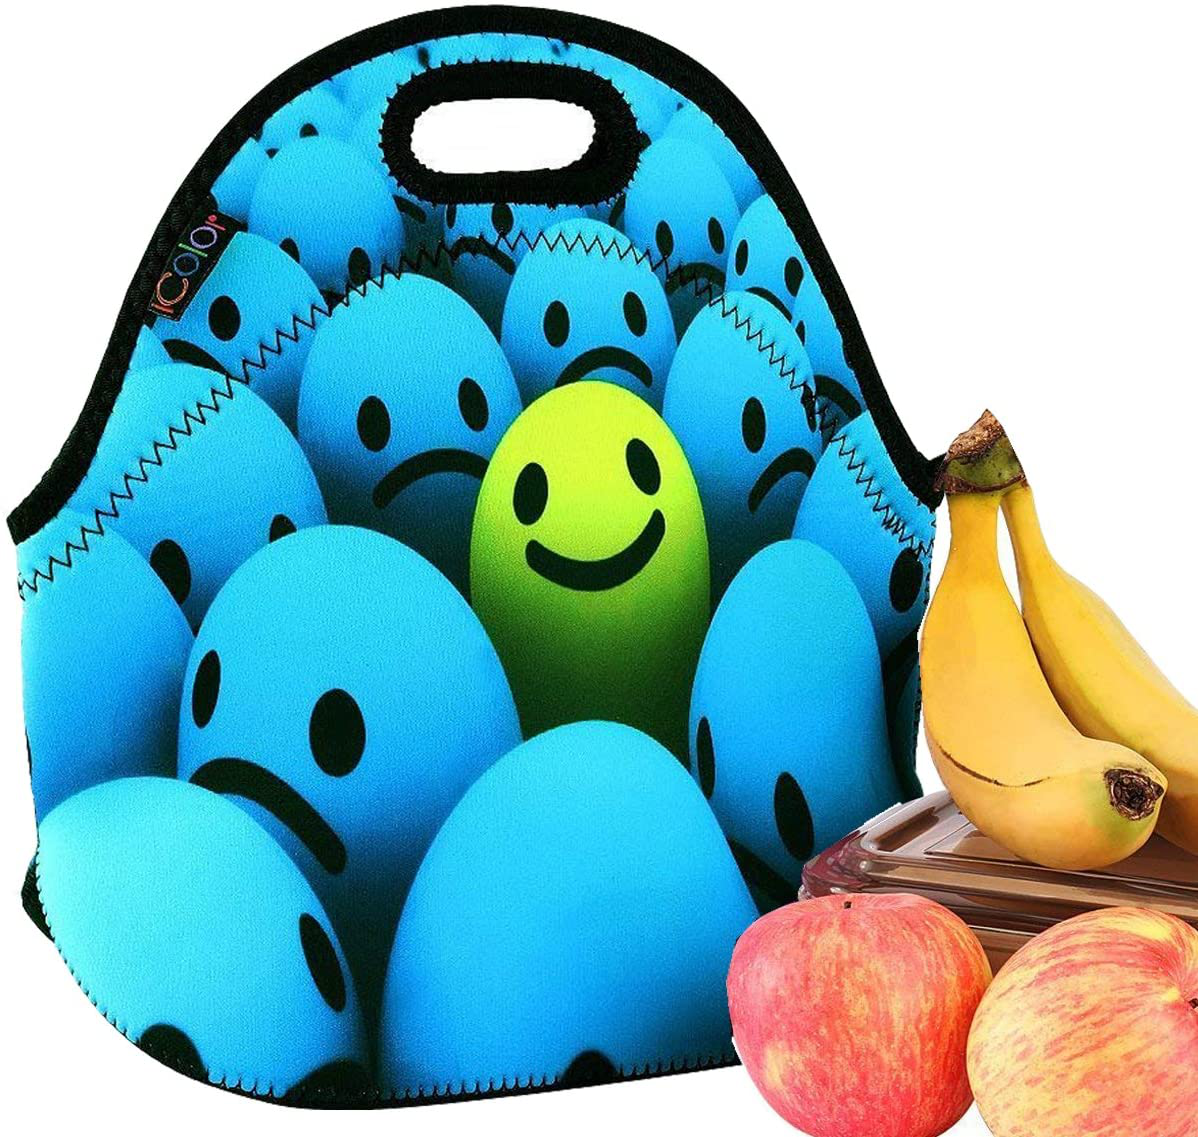 iColor Smile Boys/girls Neoprene Sleeve Food Carrying LUNCH BOX School Office Tote Pouch Cooler Insulated Holder W/ Handle Soft Cover Case